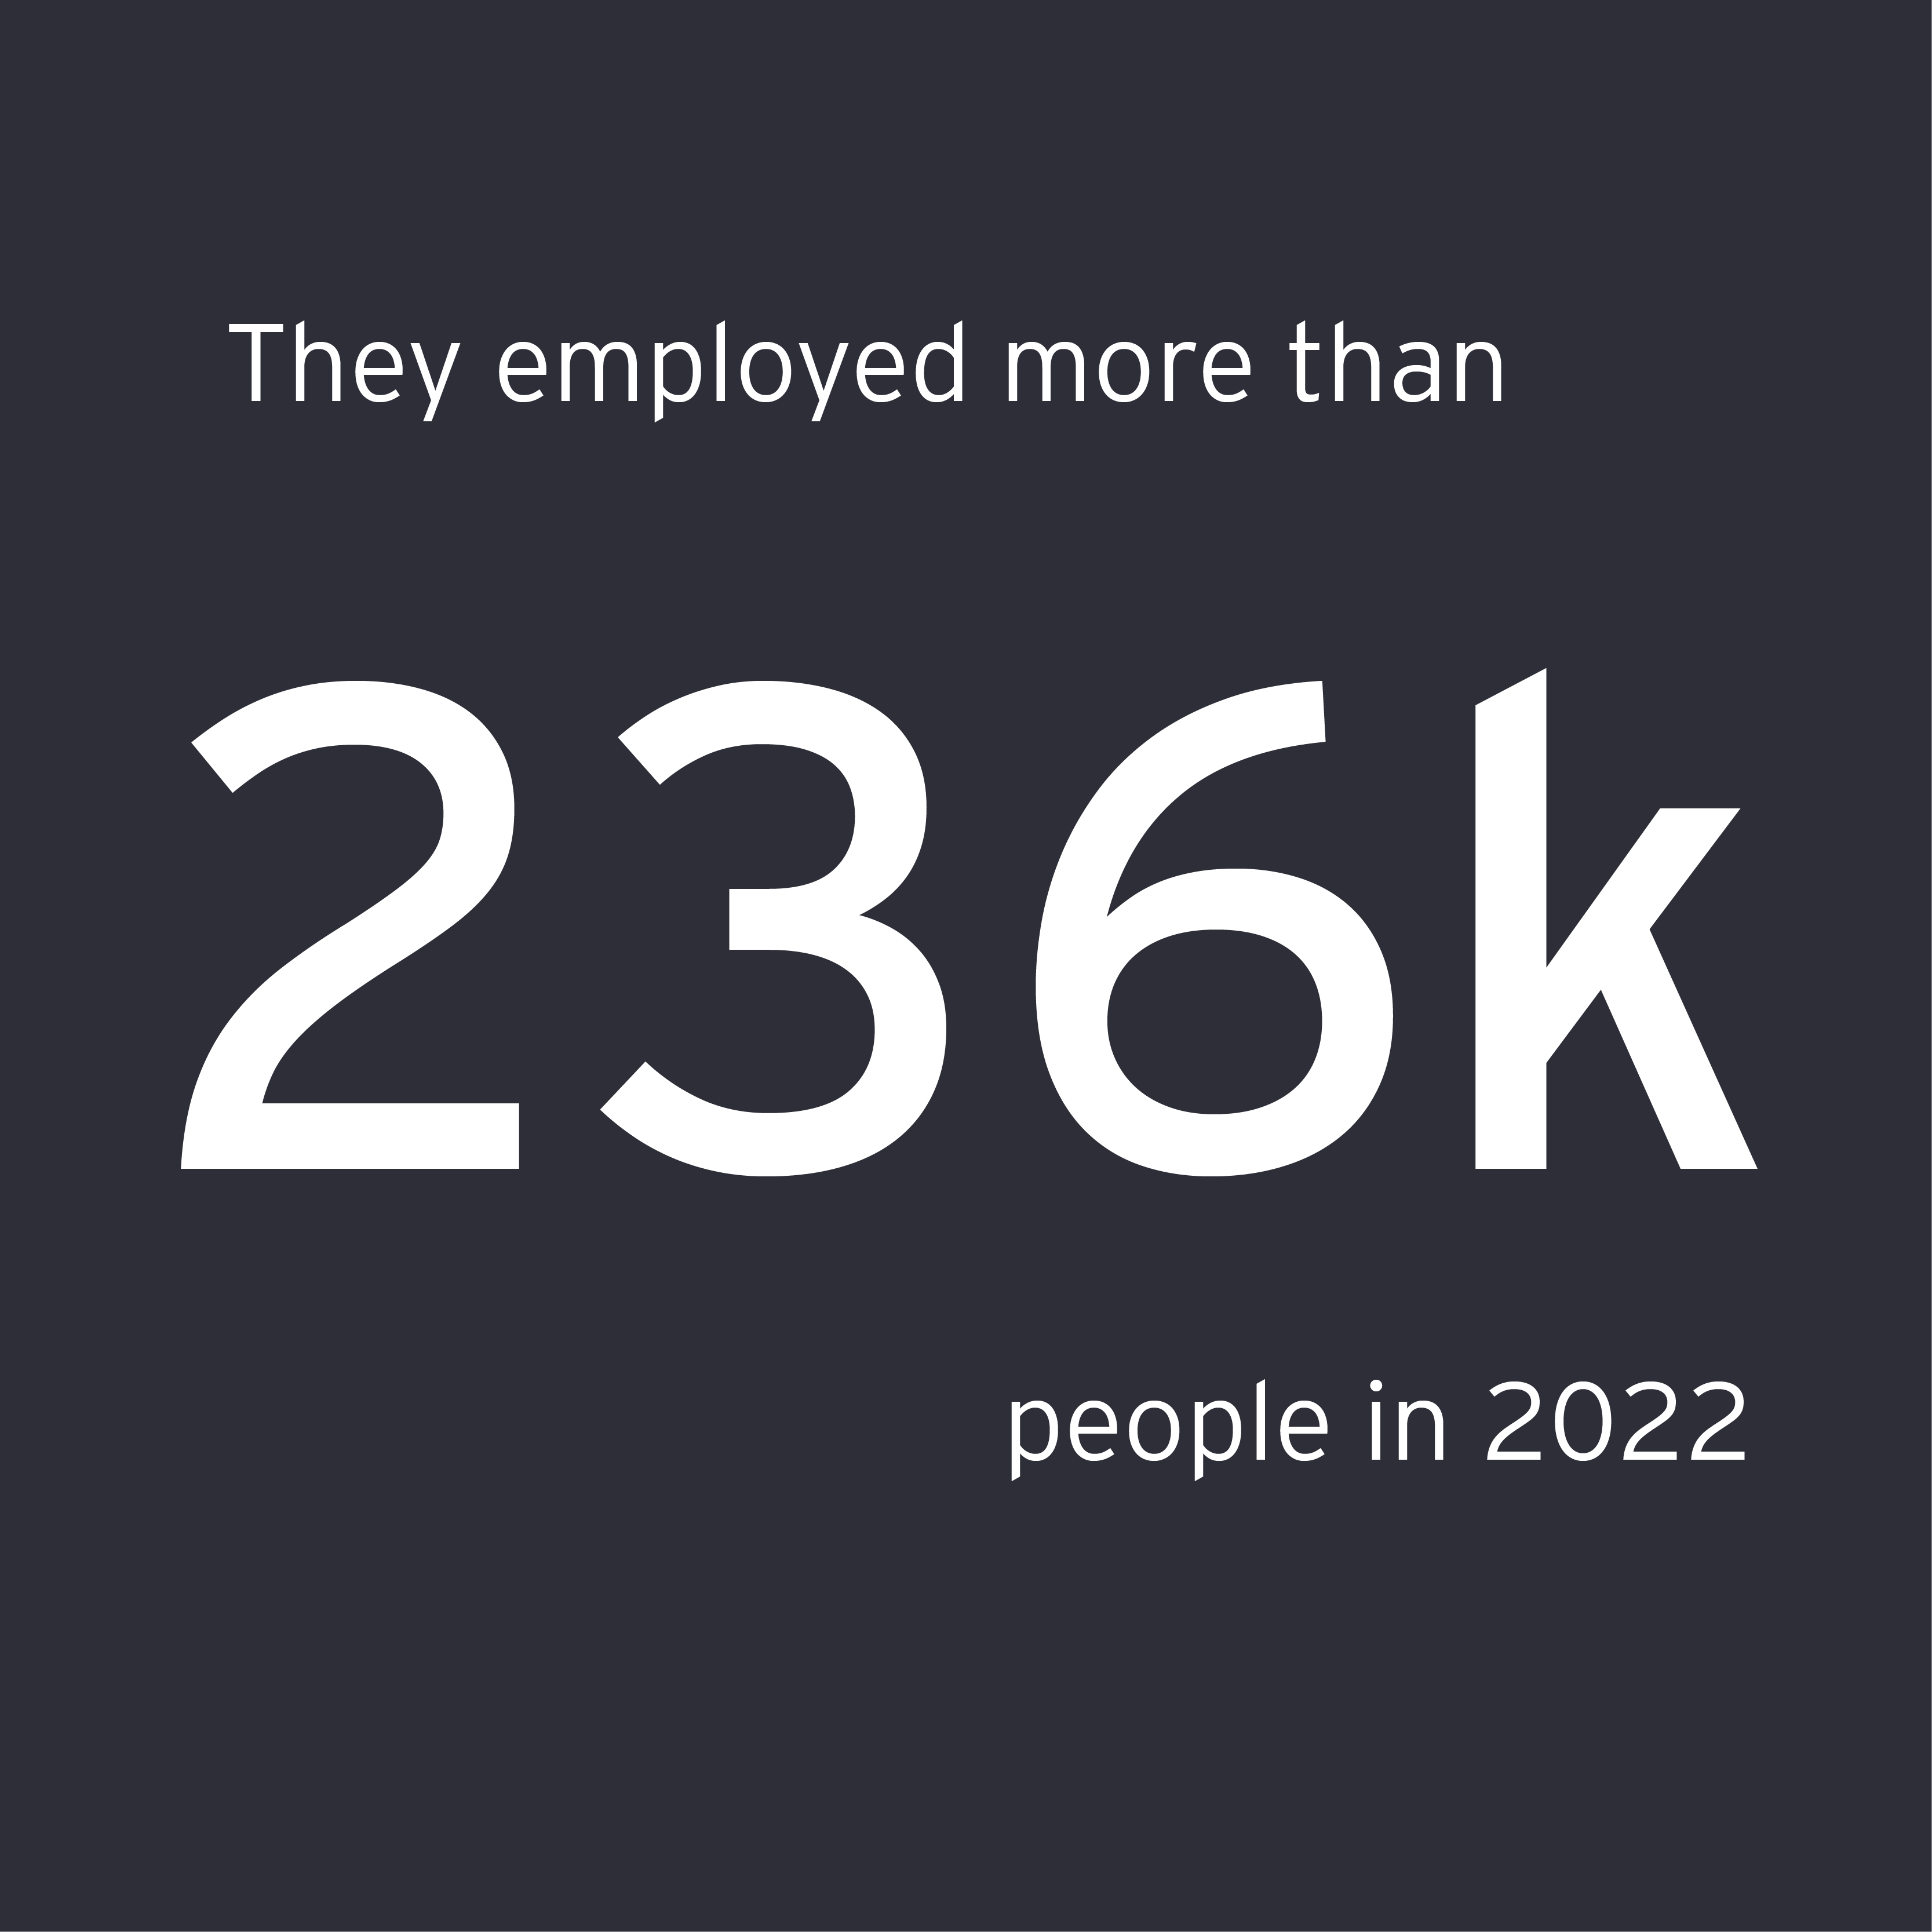 They employed more than 236k people in 2022